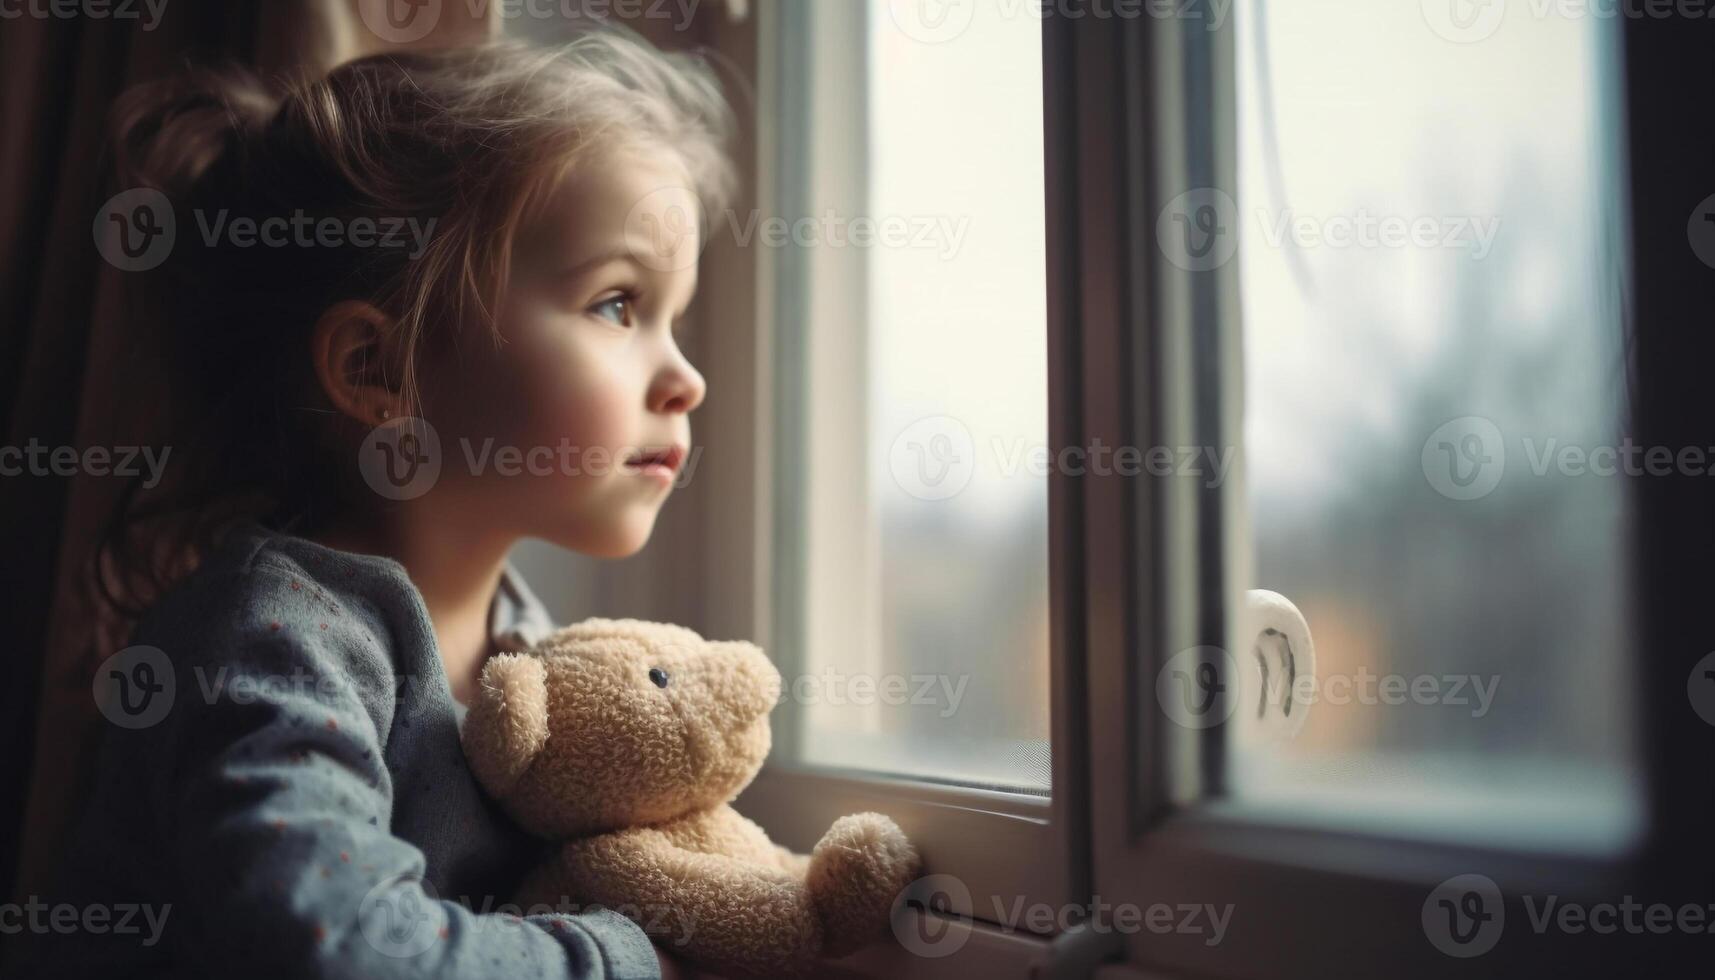 Cute toddler girl looking through window with teddy bear toy generated by AI photo